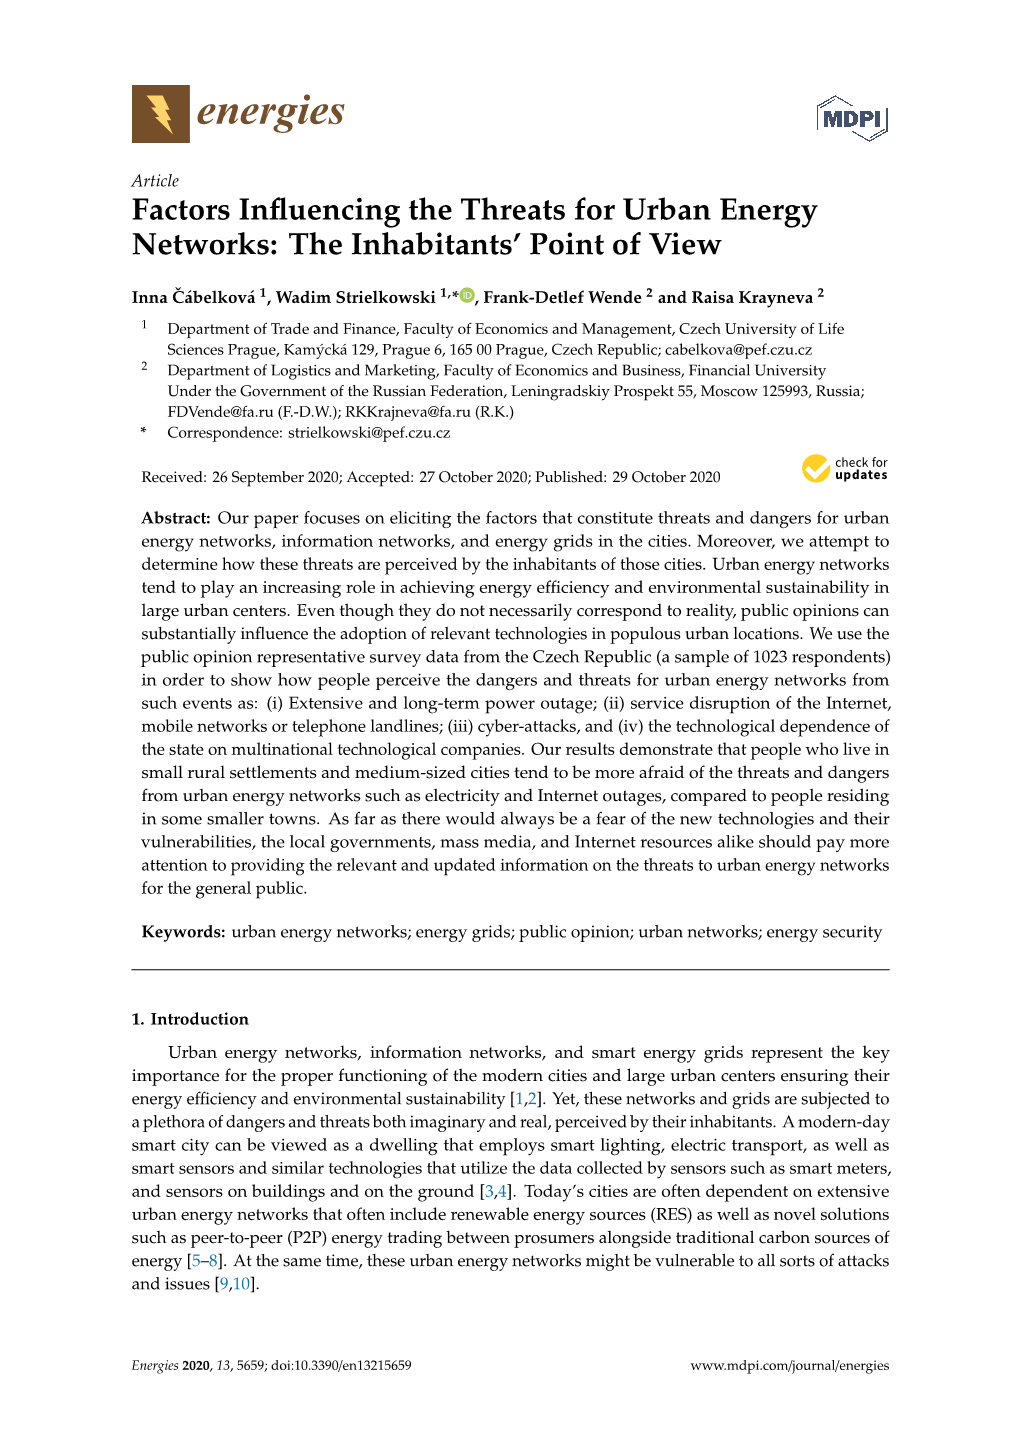 Factors Influencing the Threats for Urban Energy Networks: the Inhabitants' Point of View